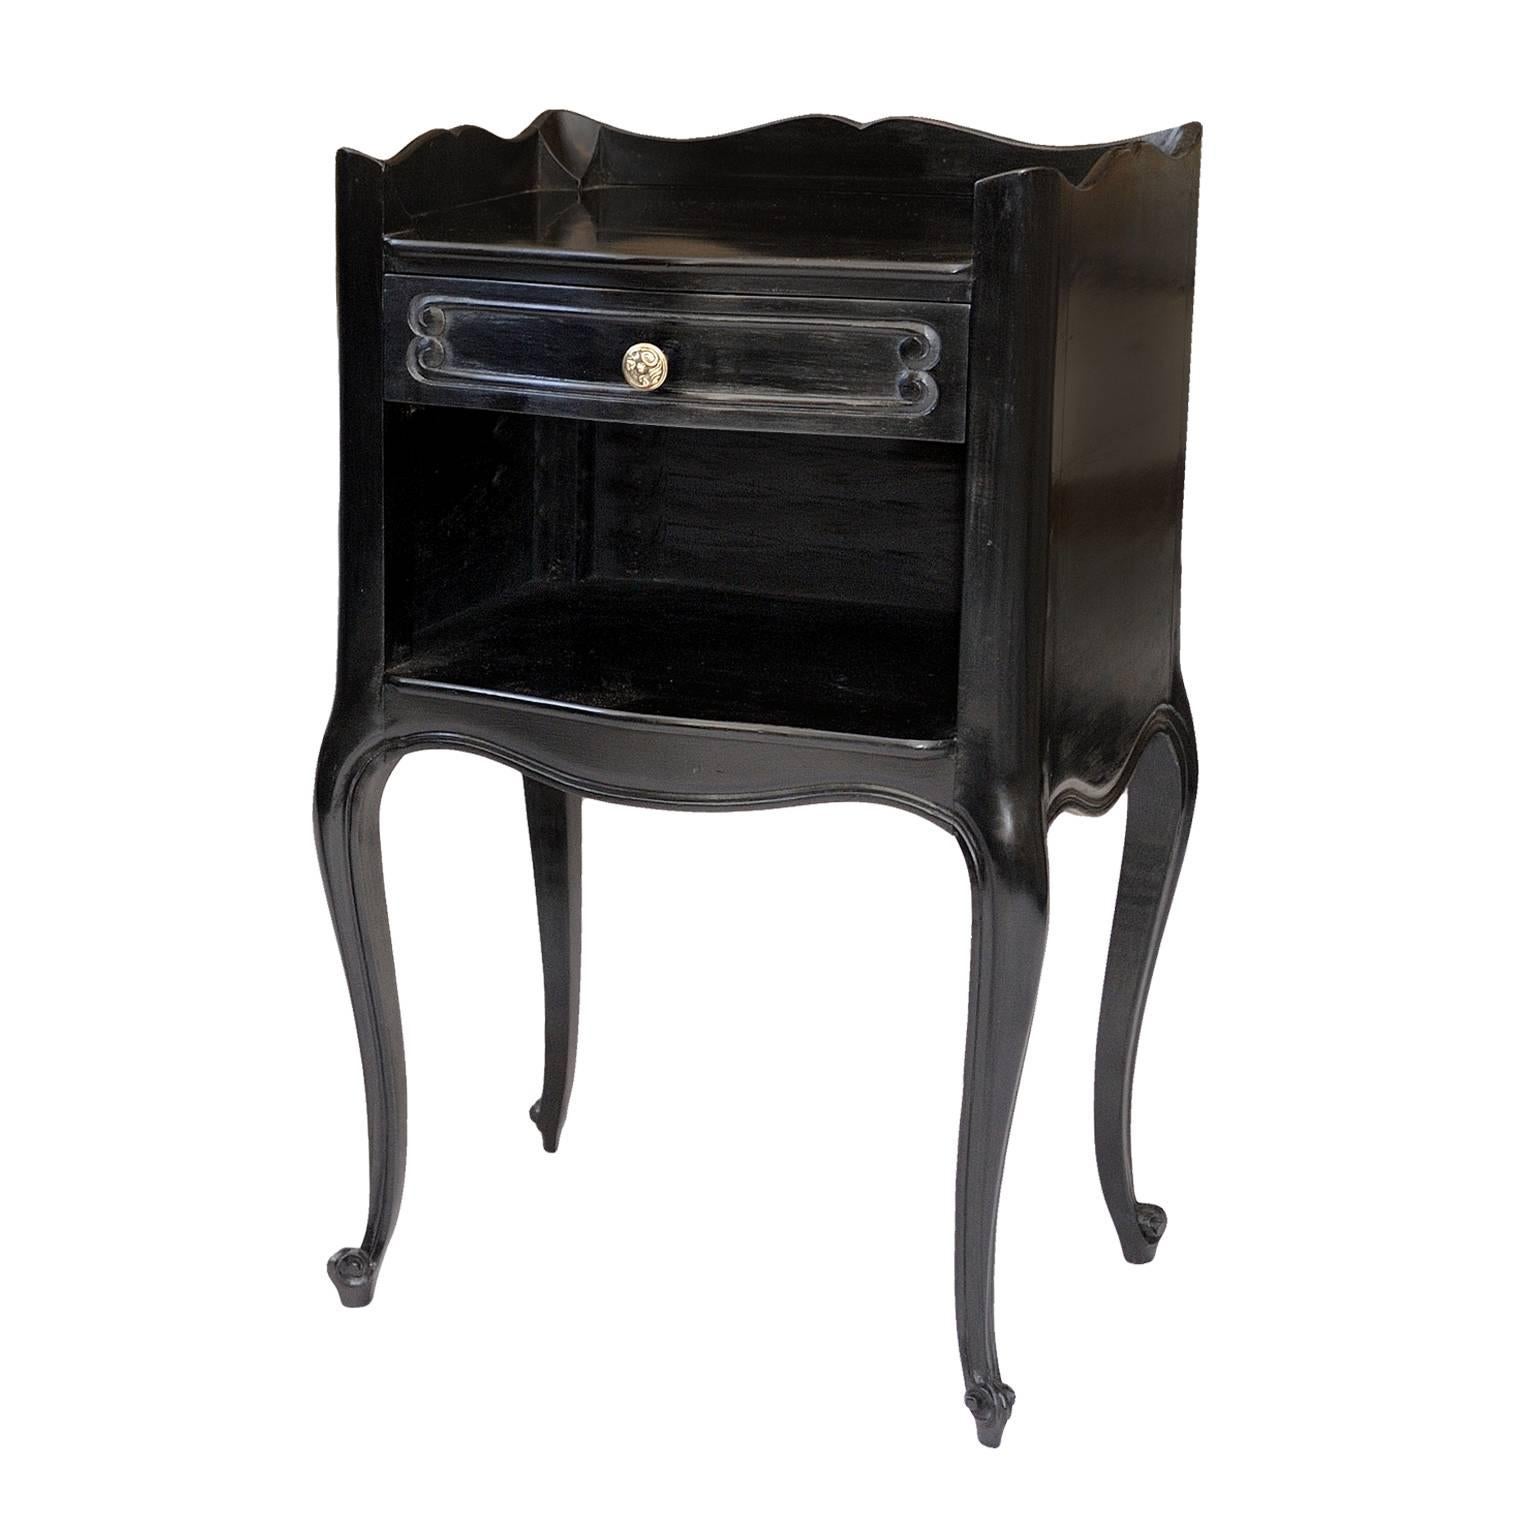 This is a charming and well-proportioned pair of French Louis XV 18th century style ebonised night/bedside tables, featuring very stylish cabriole legs with tray tops.
One table has three draws, while the other has a single draw located at the top